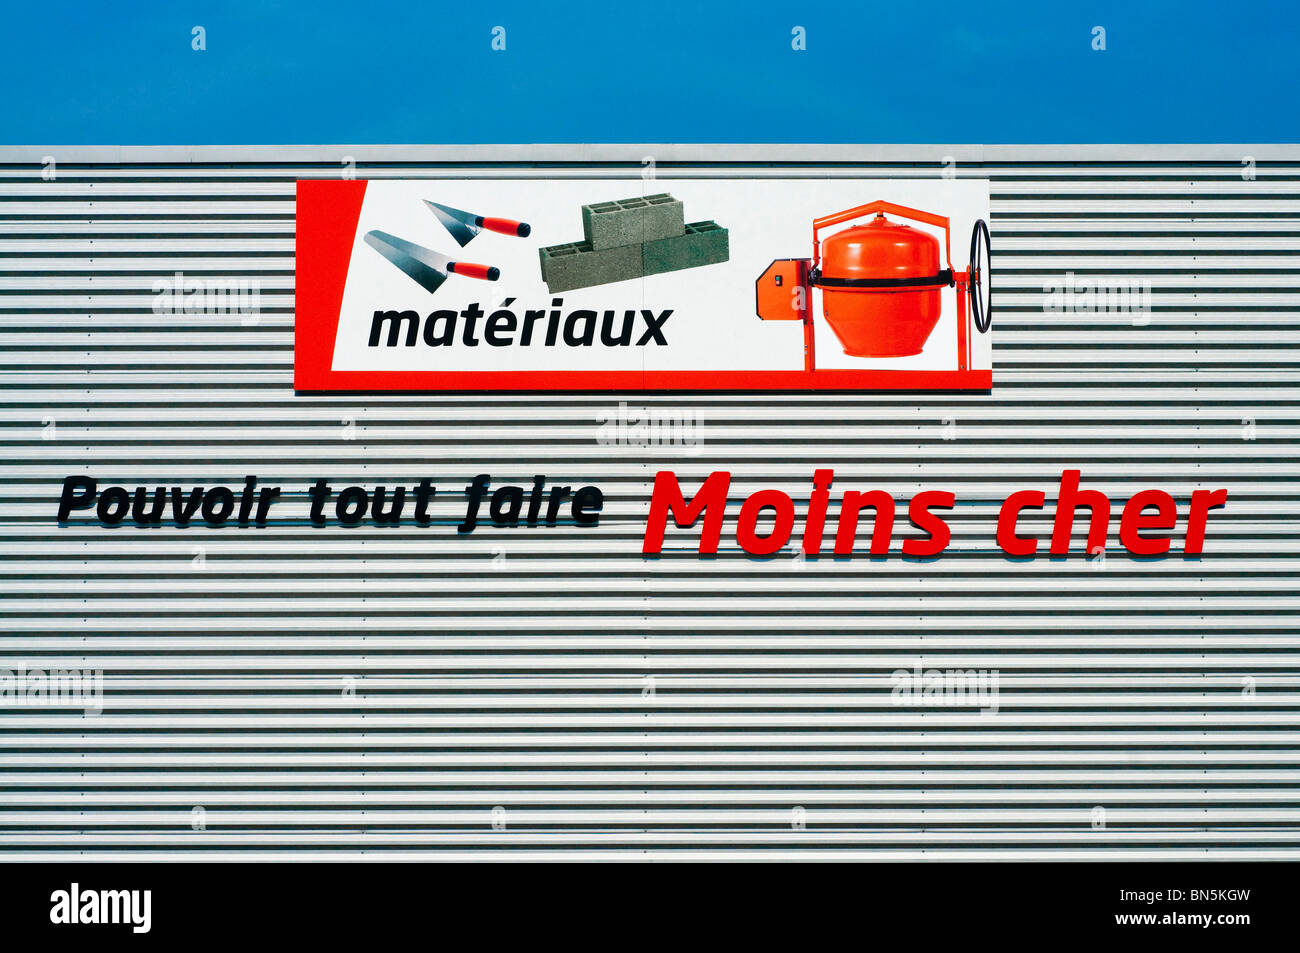 Bricomarché D-I-Y store 'matériaux' and 'moins cher' advertising signs, France. Stock Photo